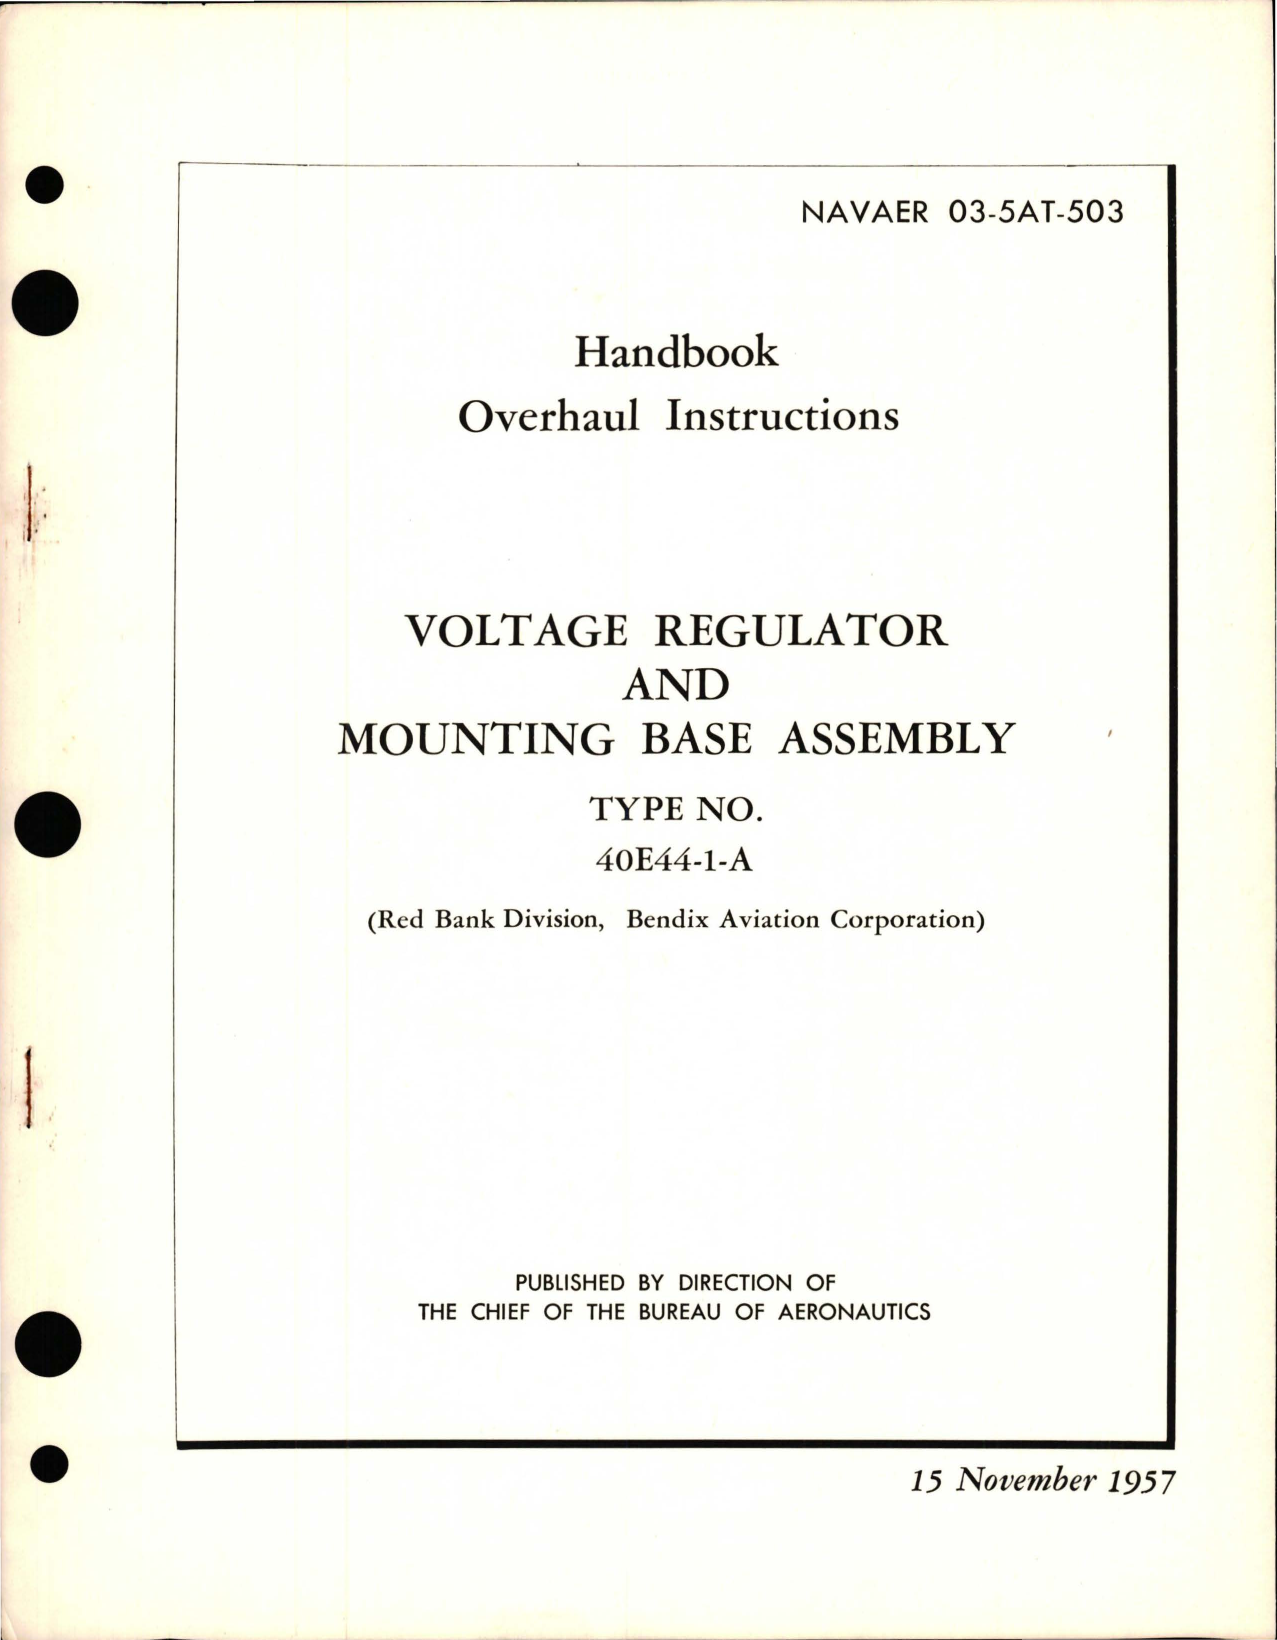 Sample page 1 from AirCorps Library document: Overhaul Instructions for Voltage Regulator and Mounting Base Assembly - Type 40E44-1-A 